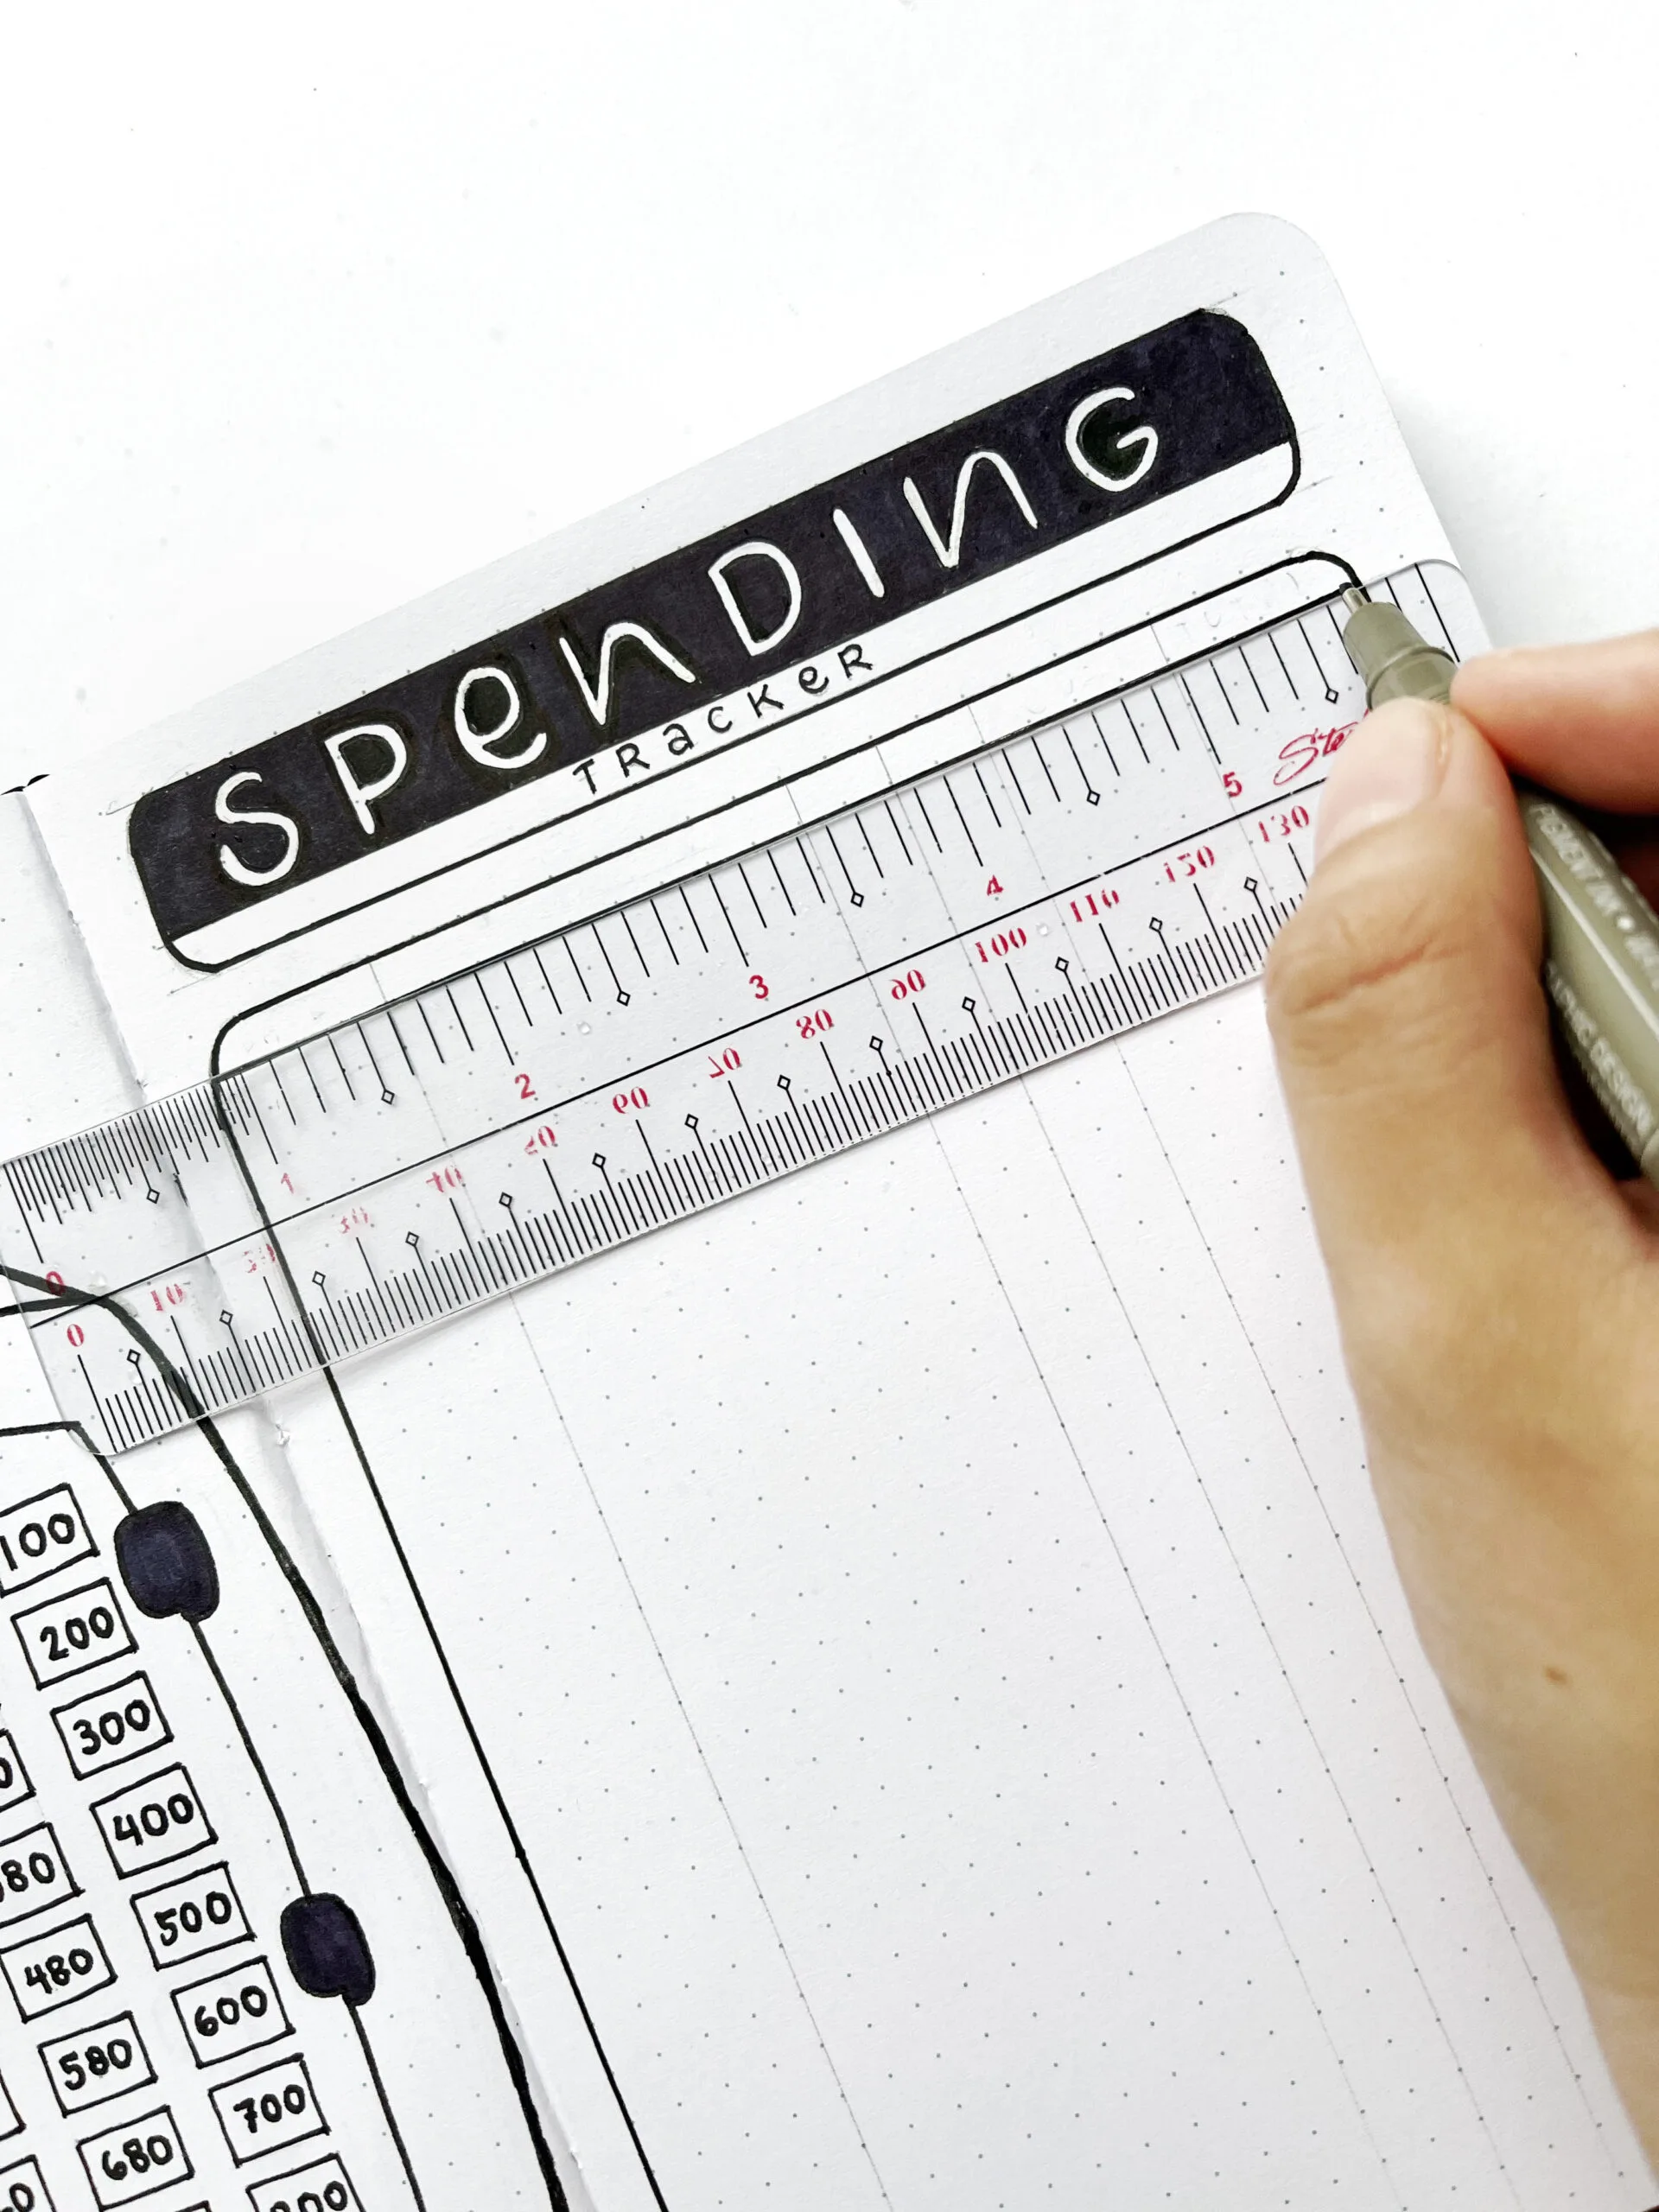 A hand tracing the spending tracker table with a pen in the bullet journal.